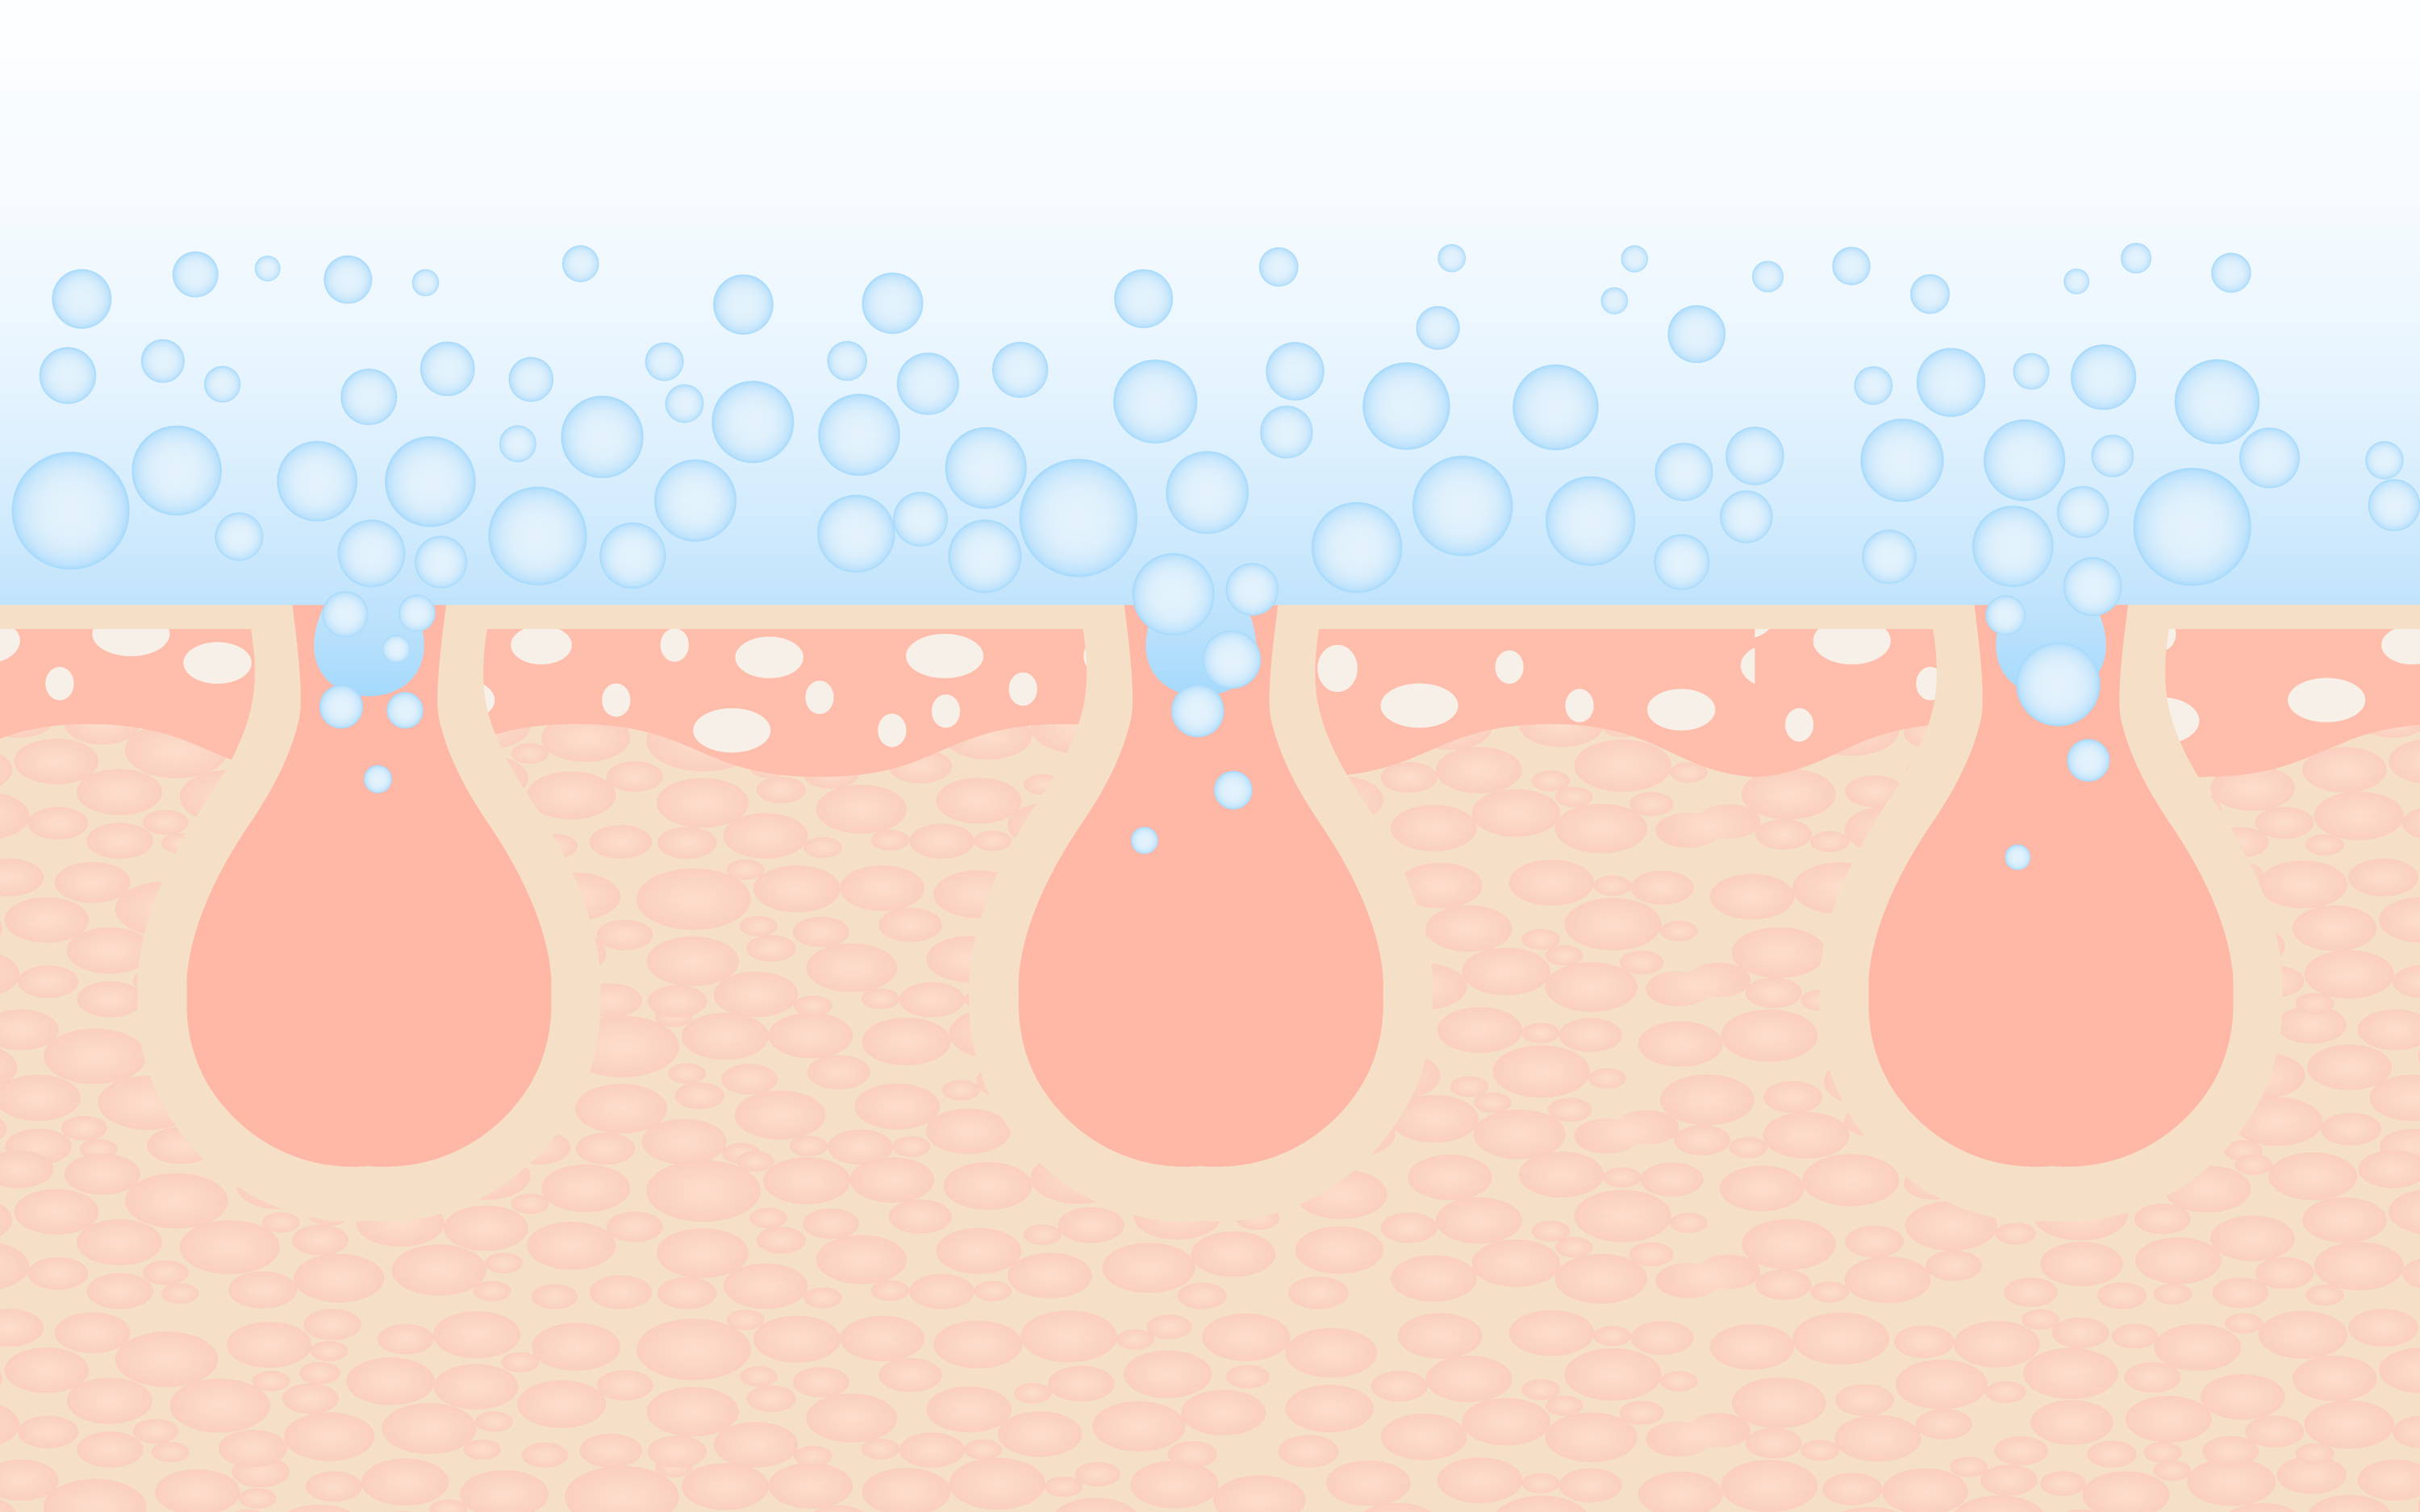 A picture of pores on the skin with blue bubbles